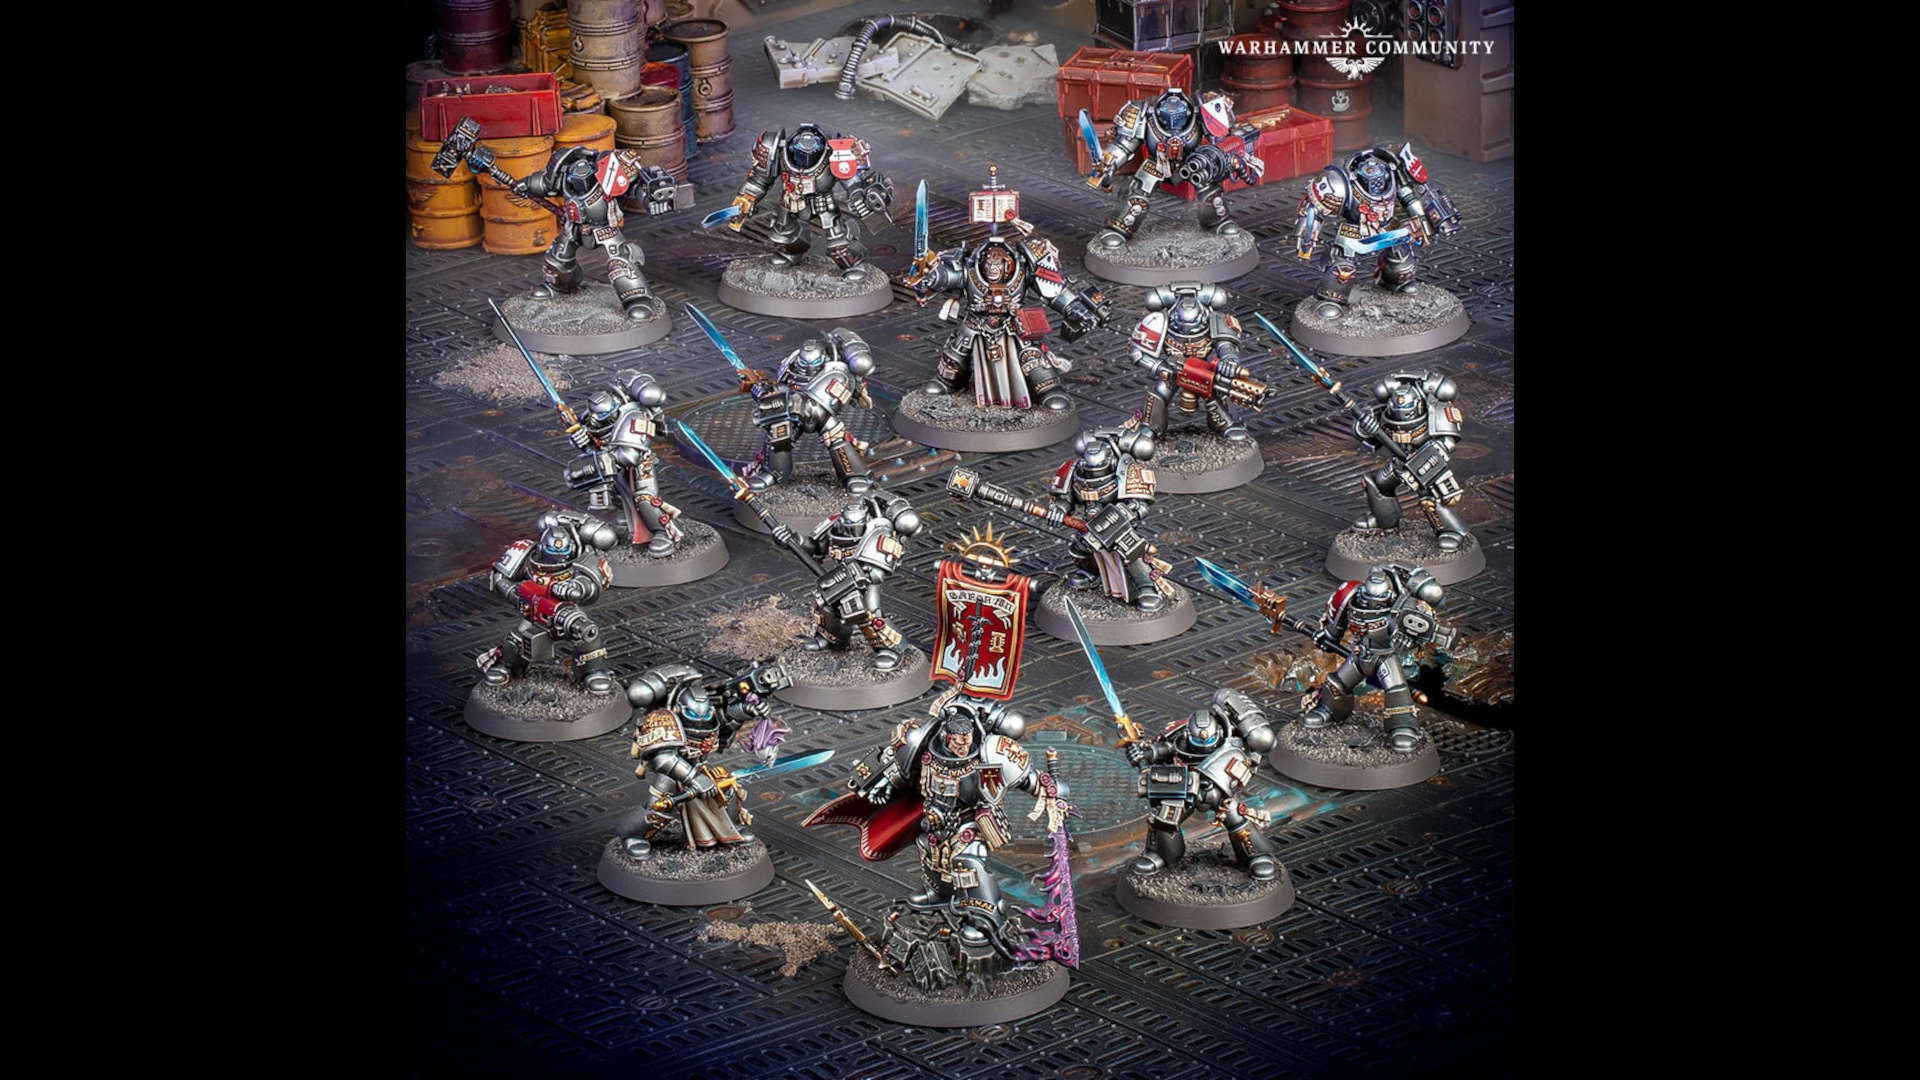 Warhammer 40k Grey Knights boarding patrol - a force of silver armoured space marines wielding glowing blue weapons advance into a space ship - models and photographs by Games Workshop